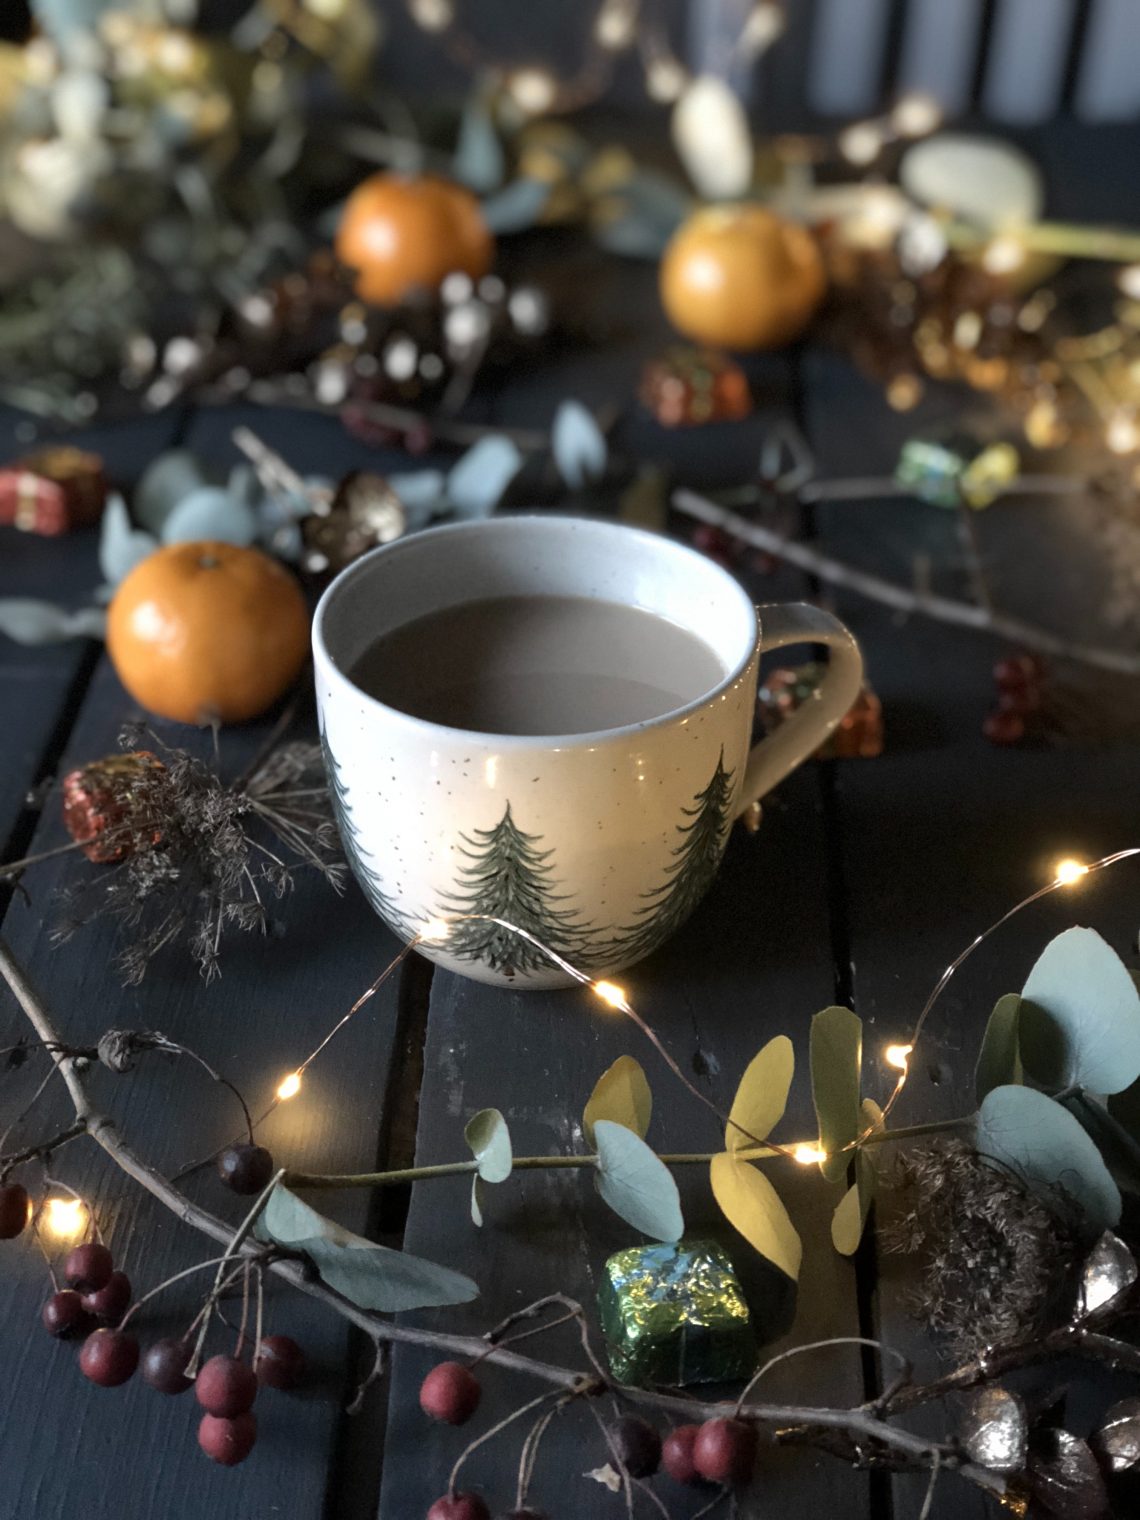 7 Ways To Make Your Room More Hygge This Christmas: Embrace the Danish lifestyle of Hygge this Christmas by creating a cozy home with some hygge home decor ideas on how to make your room more cozy and friendly around Christmas! And to live the Danish philosophy. @chloedominik #hygge #hyggechristmas #hyggeaesthetic #hyggehome #hyggelifetsyle #hyggedecor #hyggeideas #hyggecozyliving